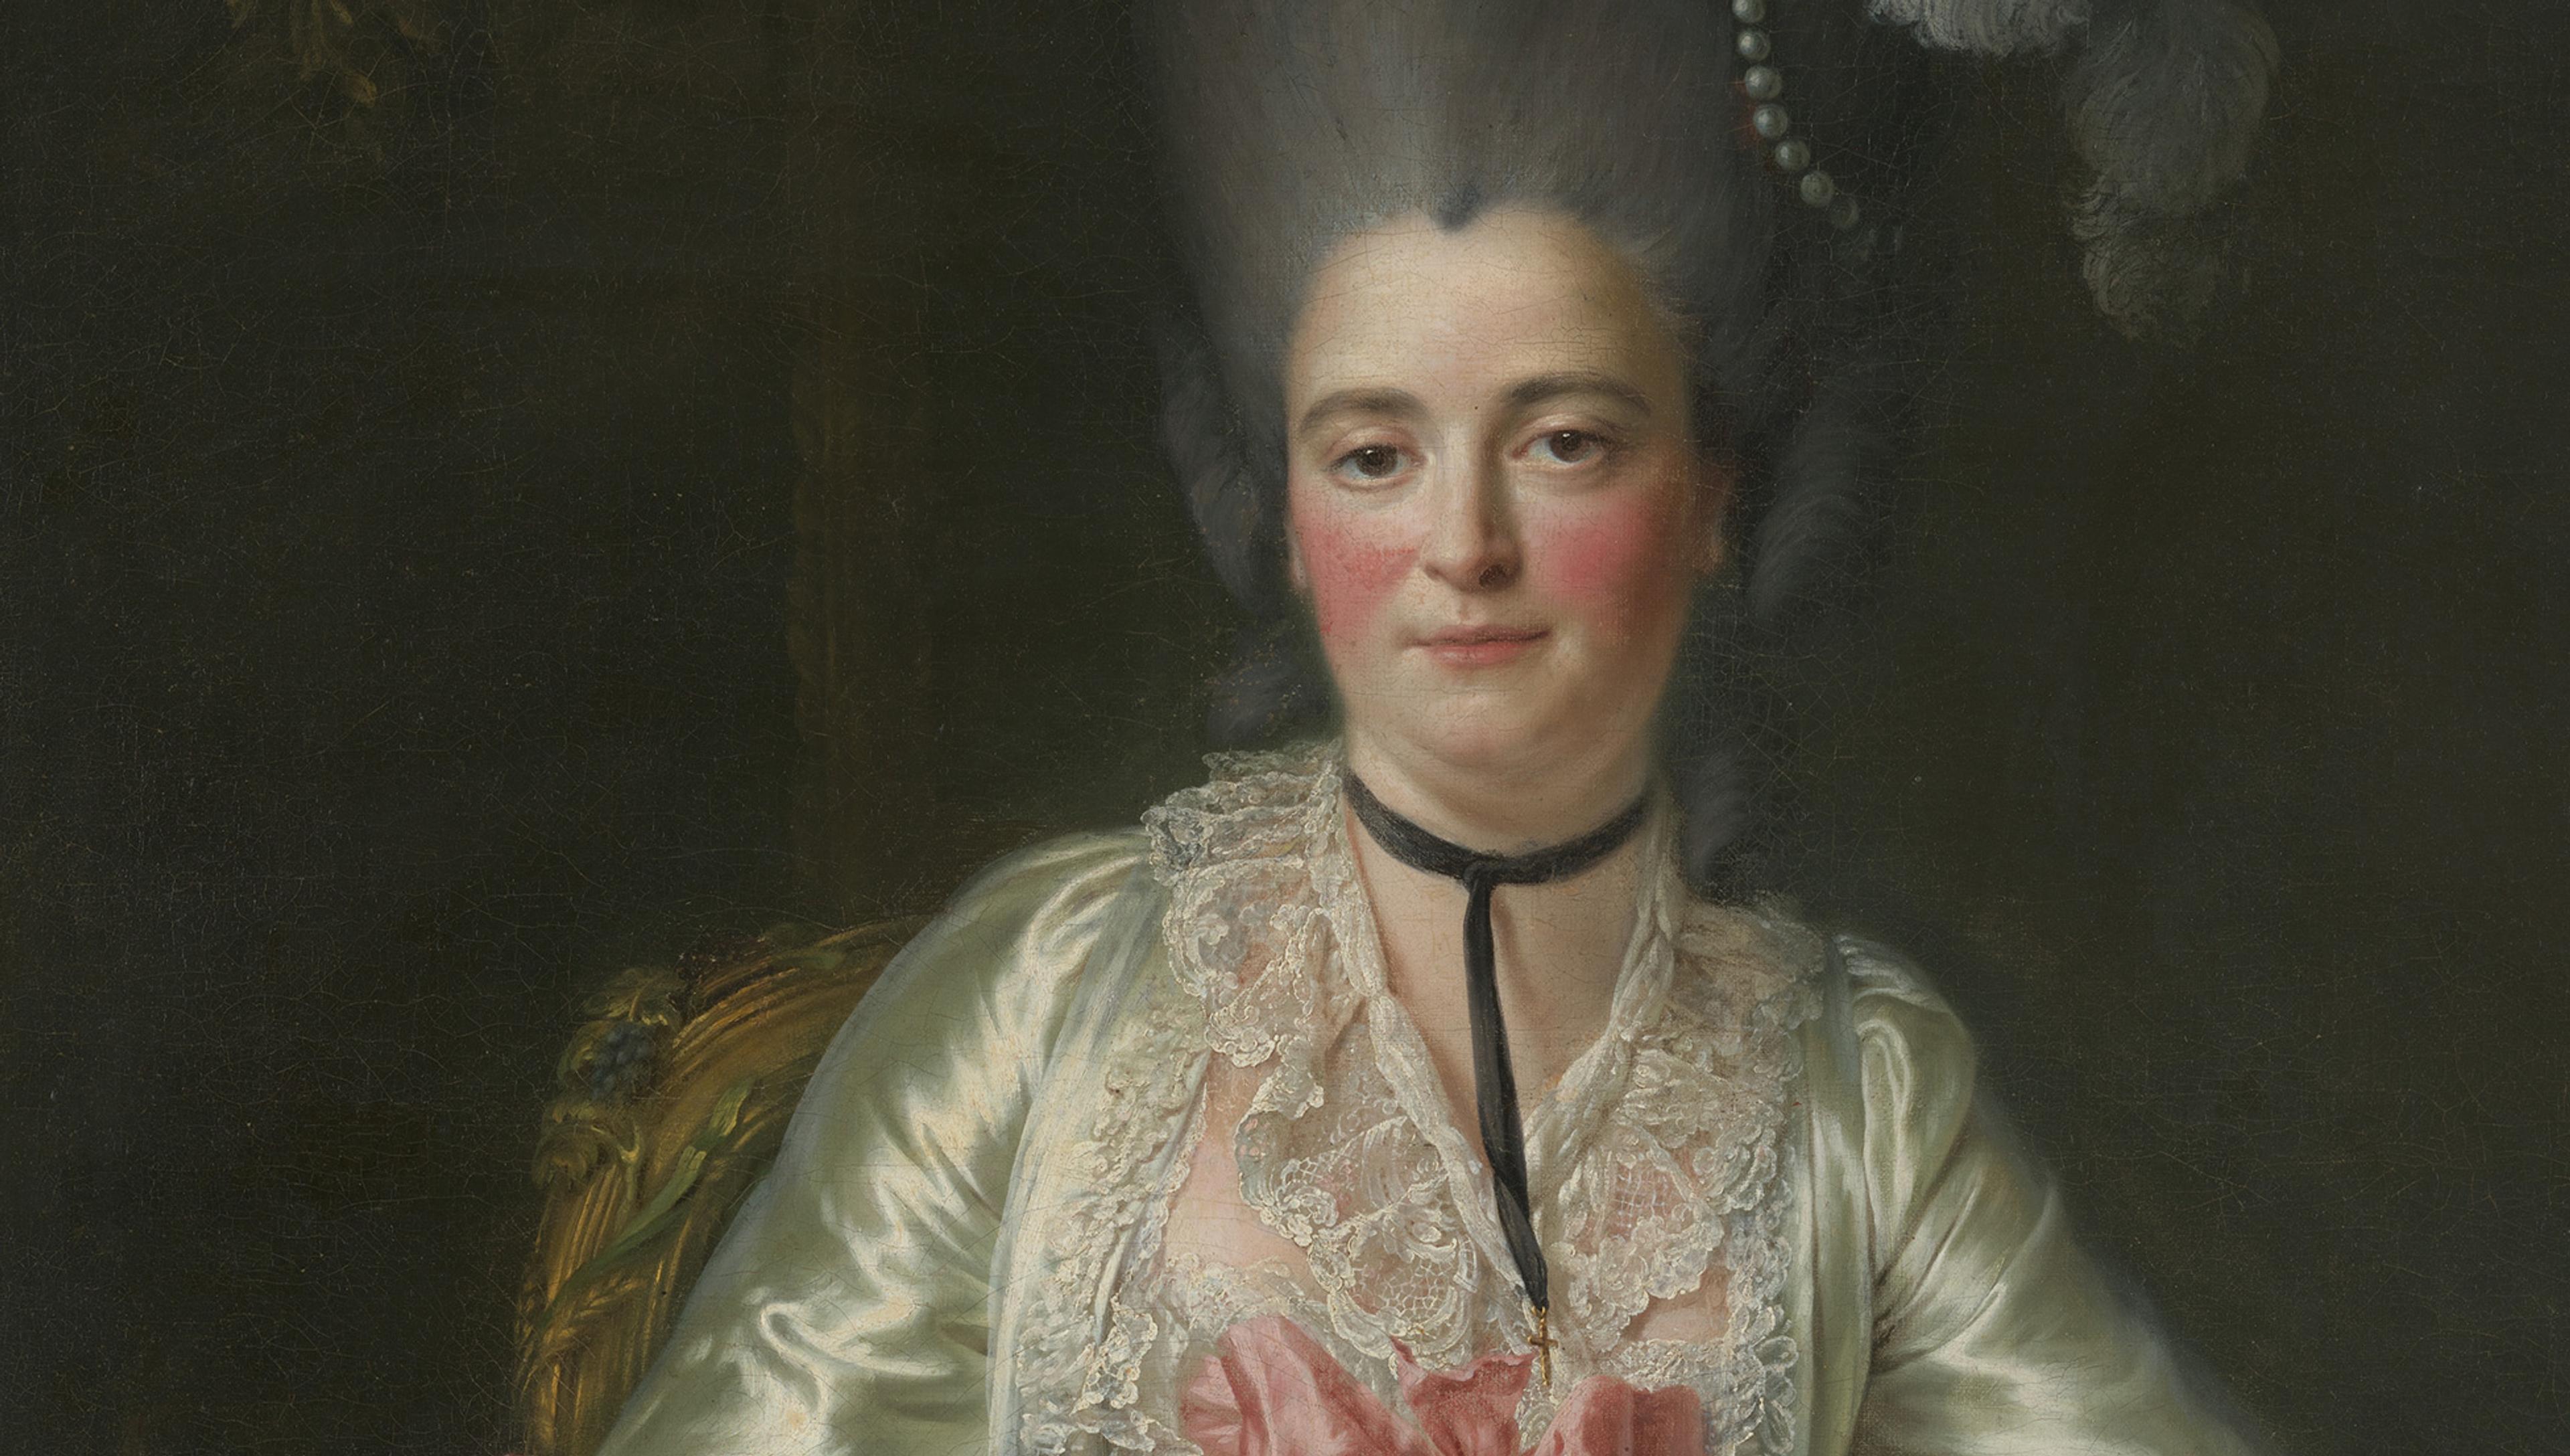 A portrait of a woman with powdered hair wearing a silk dress, lace collar, black choker, and a pink ribbon, seated against a dark background.